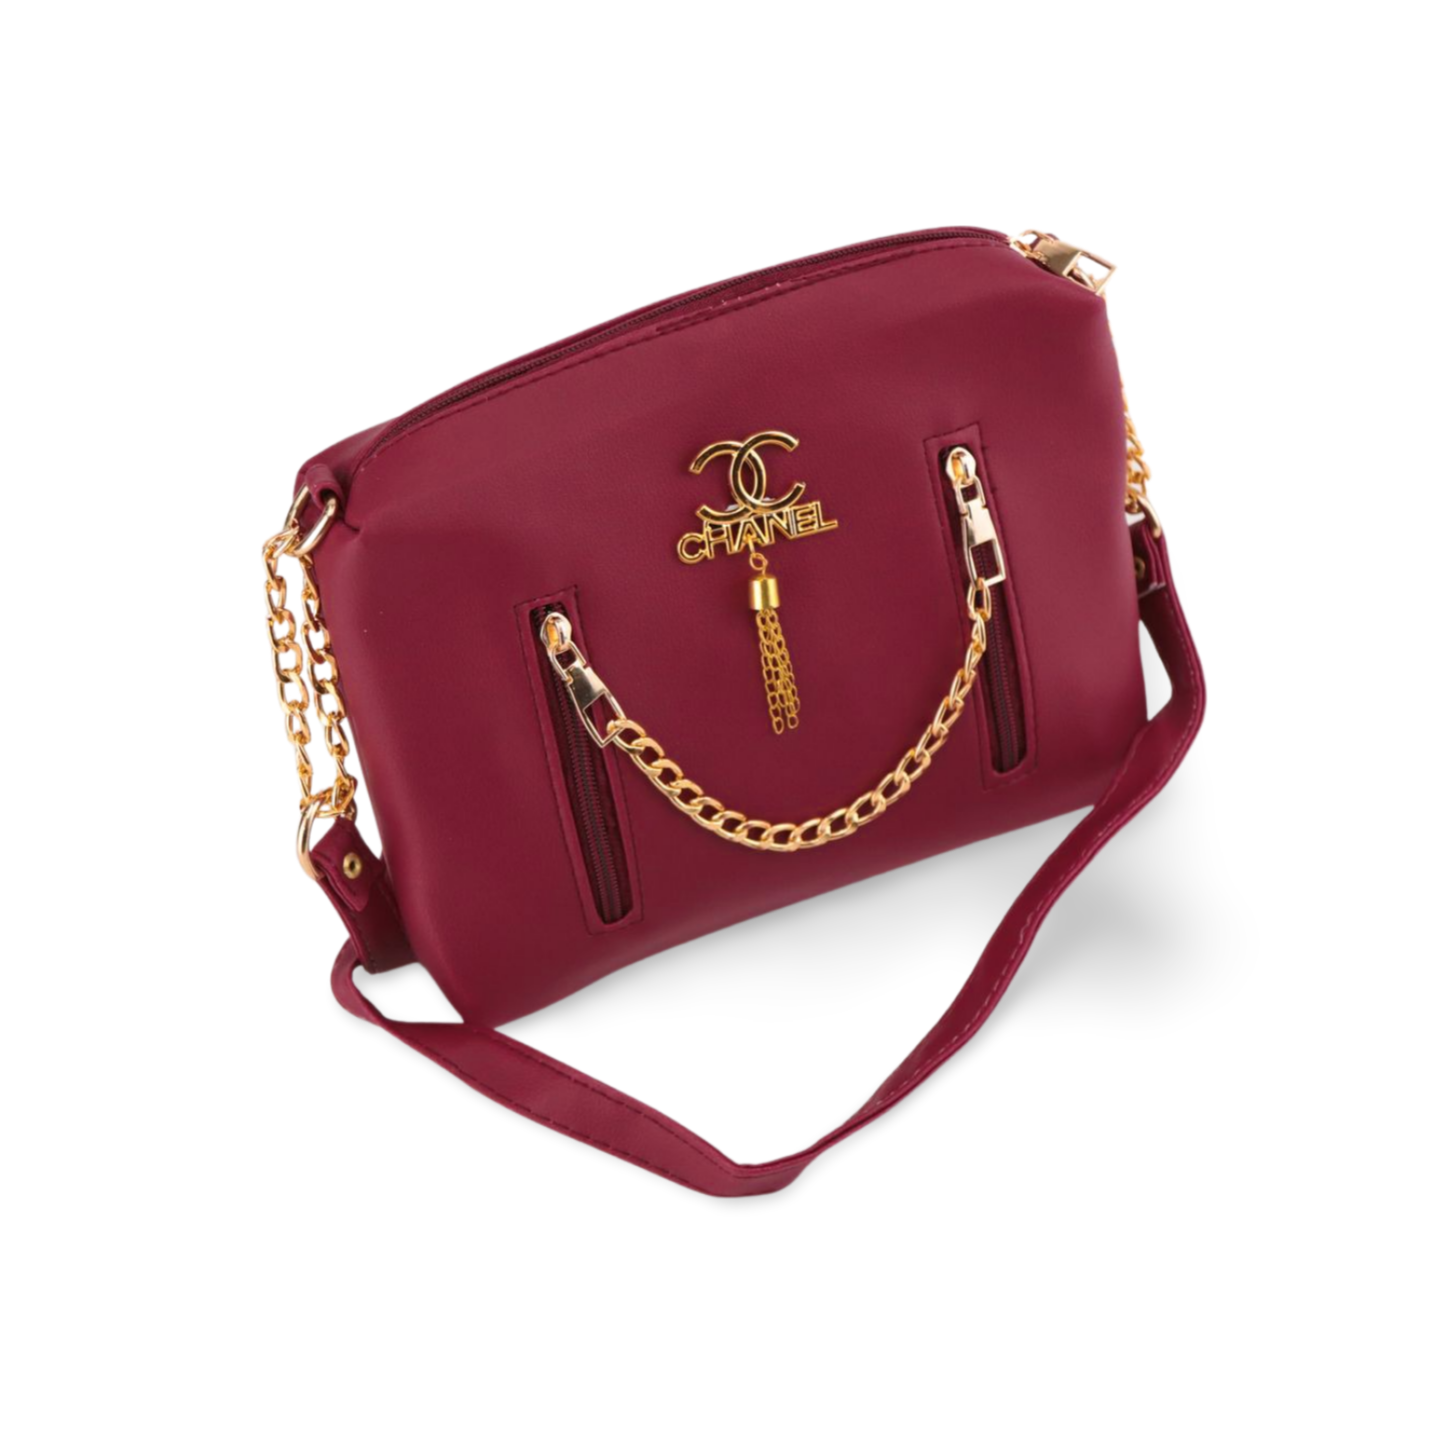 Stylish Crossbody Bag with Luxe Gold Chain and Tassel